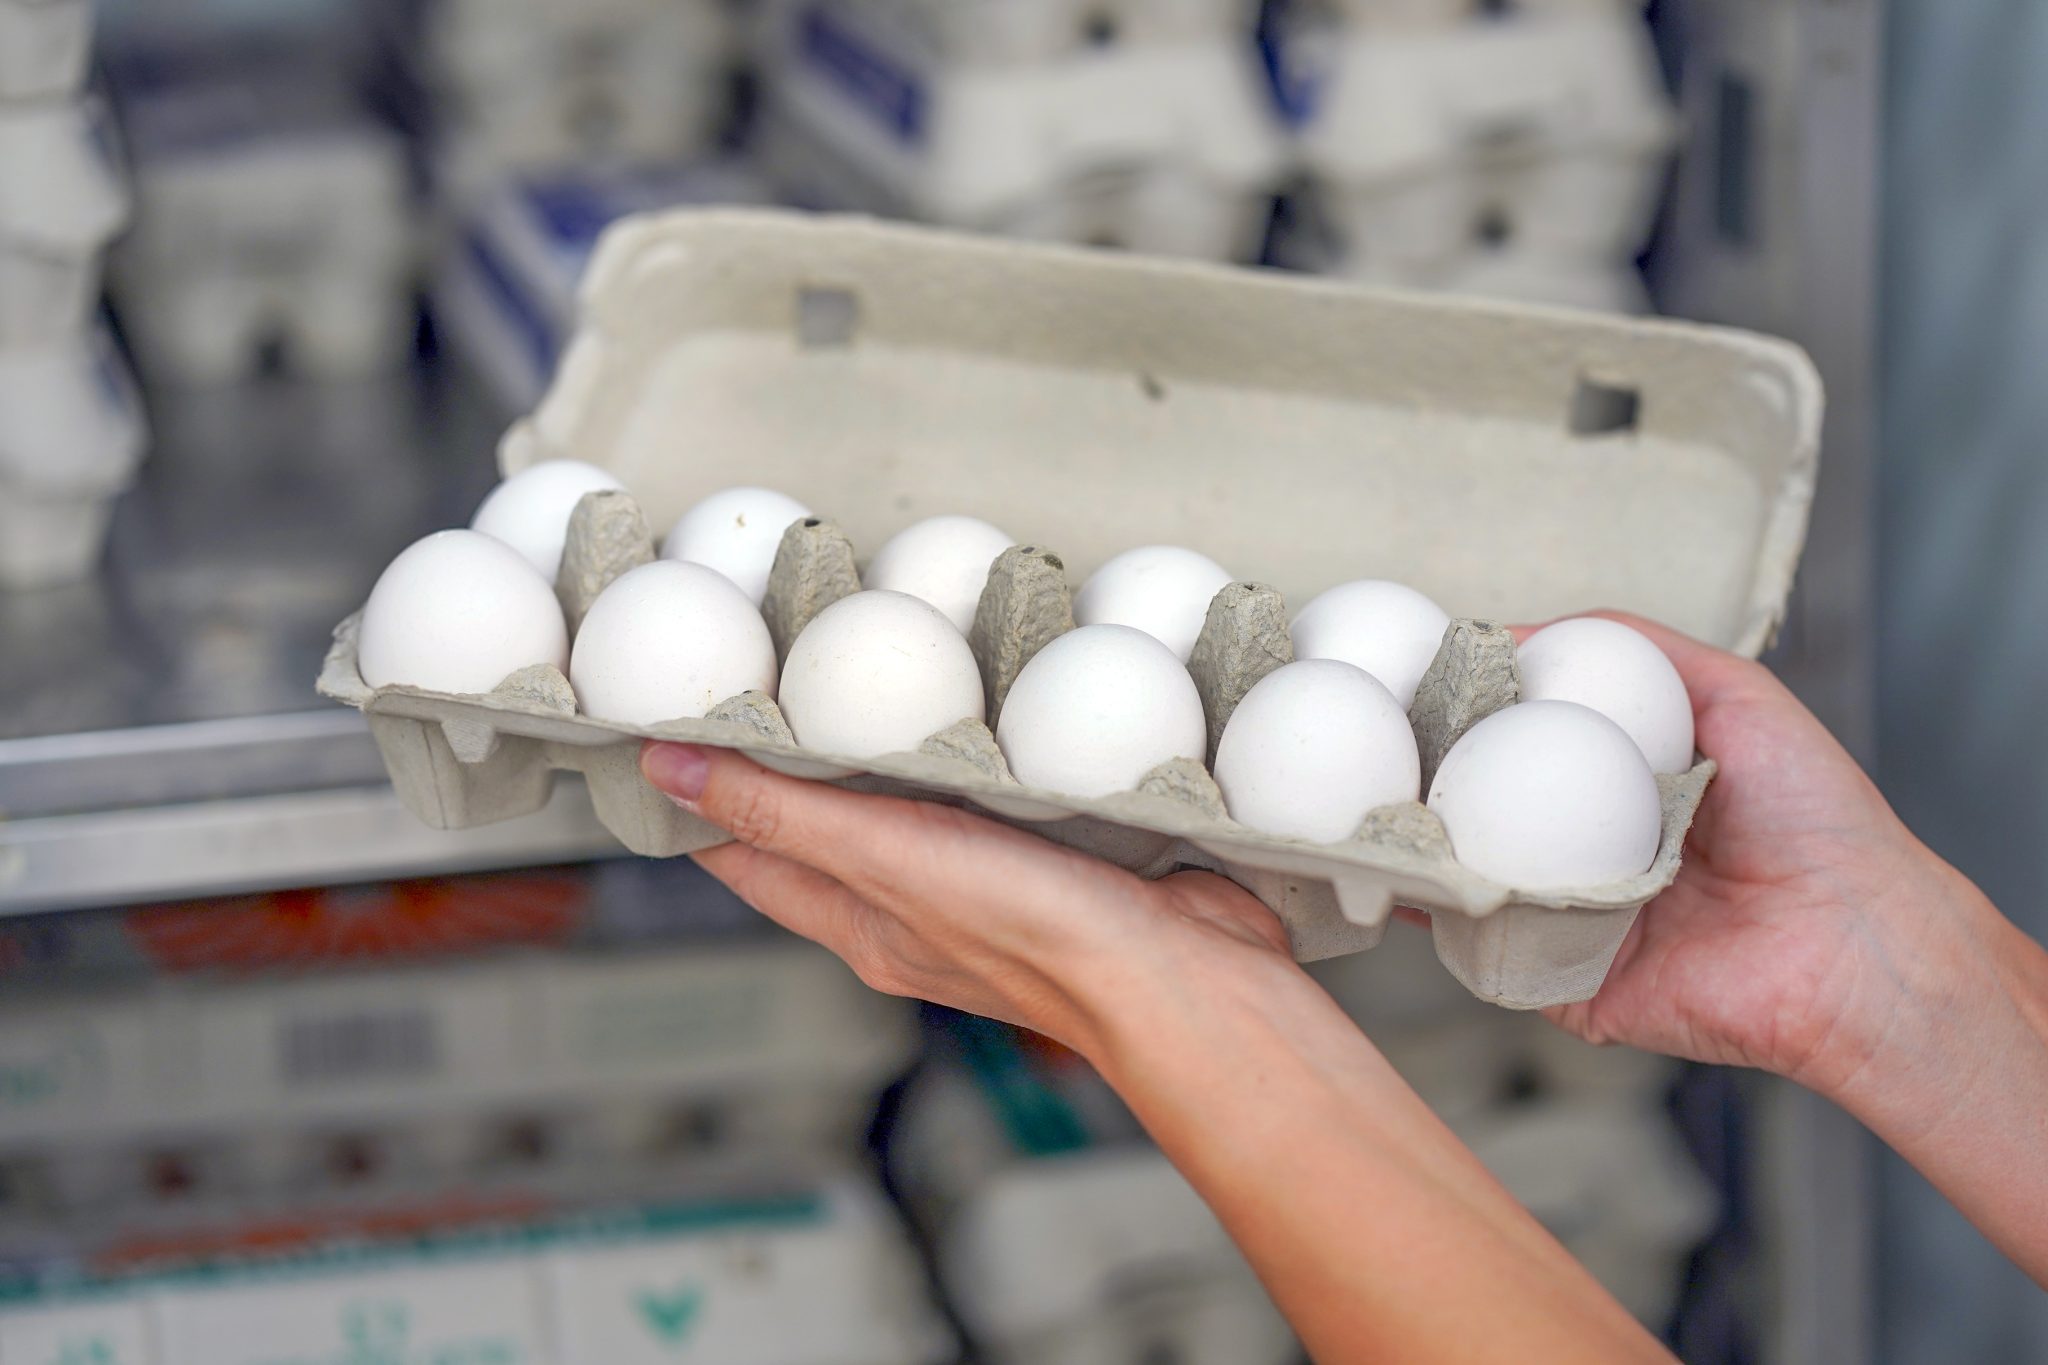 Egg carton at the grocery store